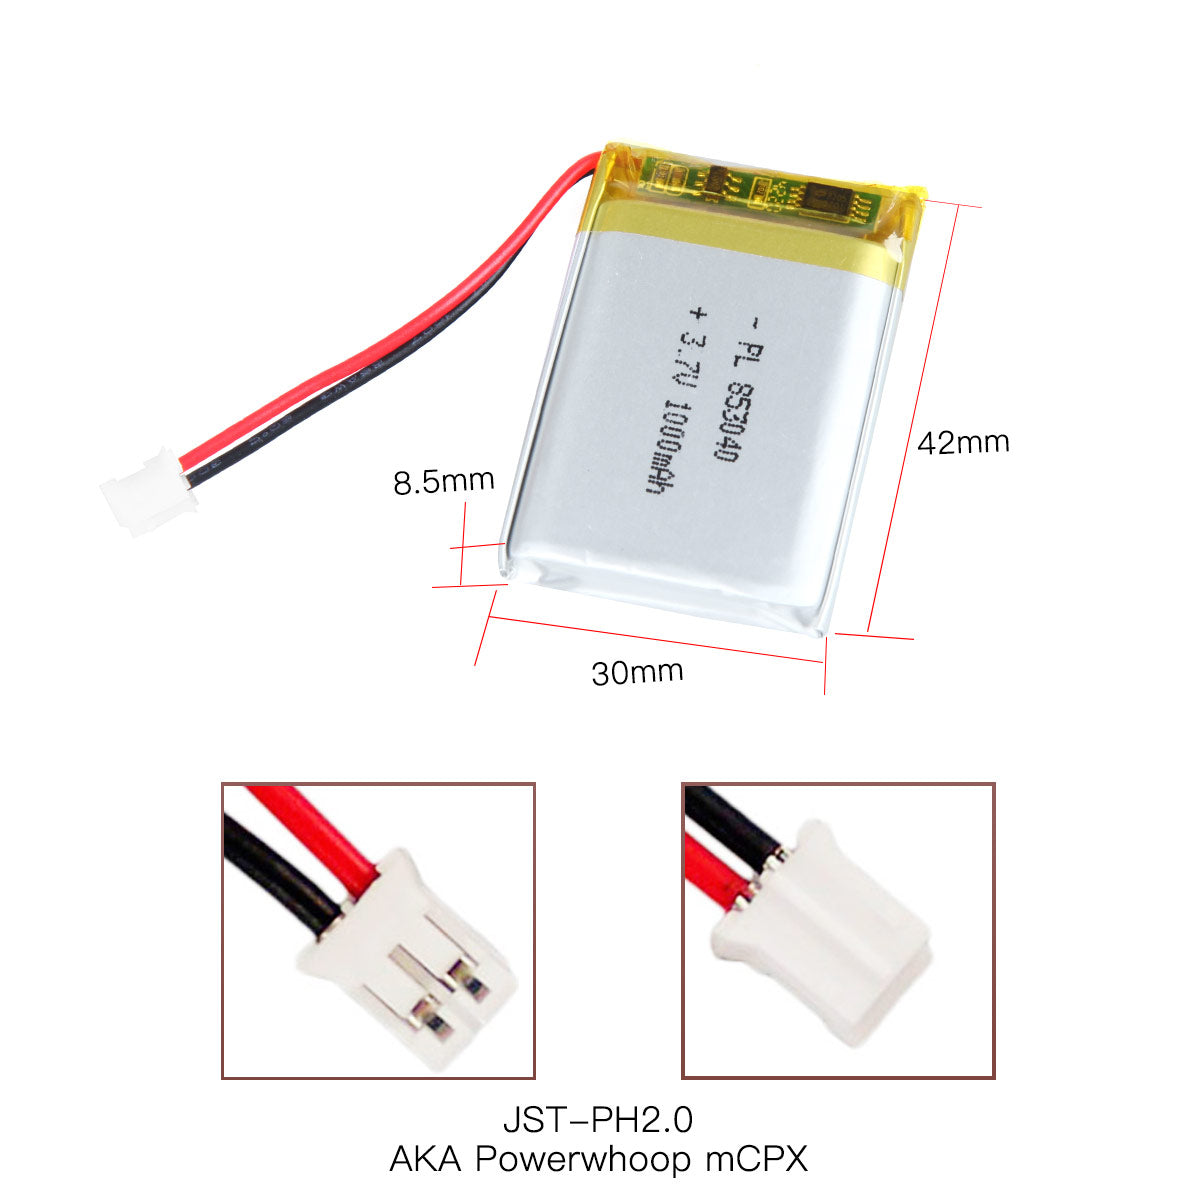 YDL 3.7V 1000mAh 853040 Rechargeable Polymer Lithium-Ion Battery